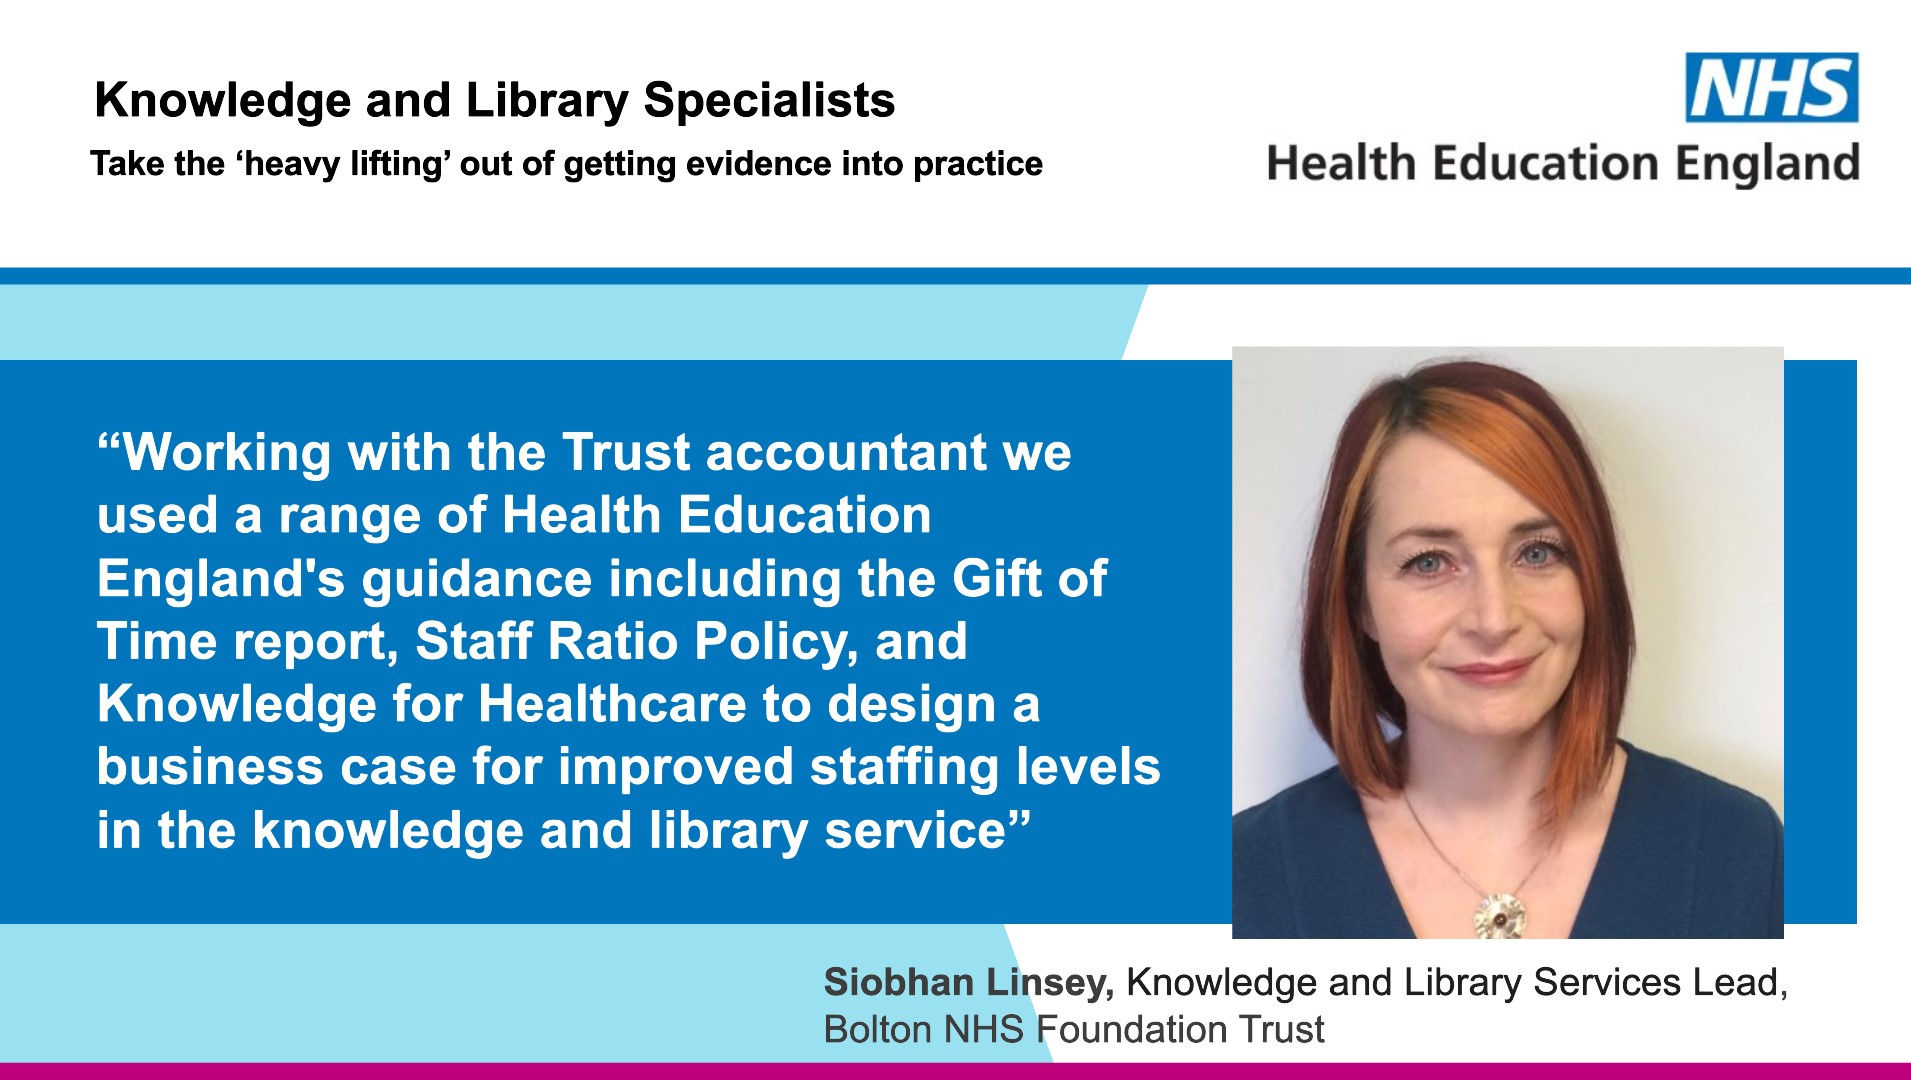 Social card image showing Siobhan Linsey.  Text as shown below